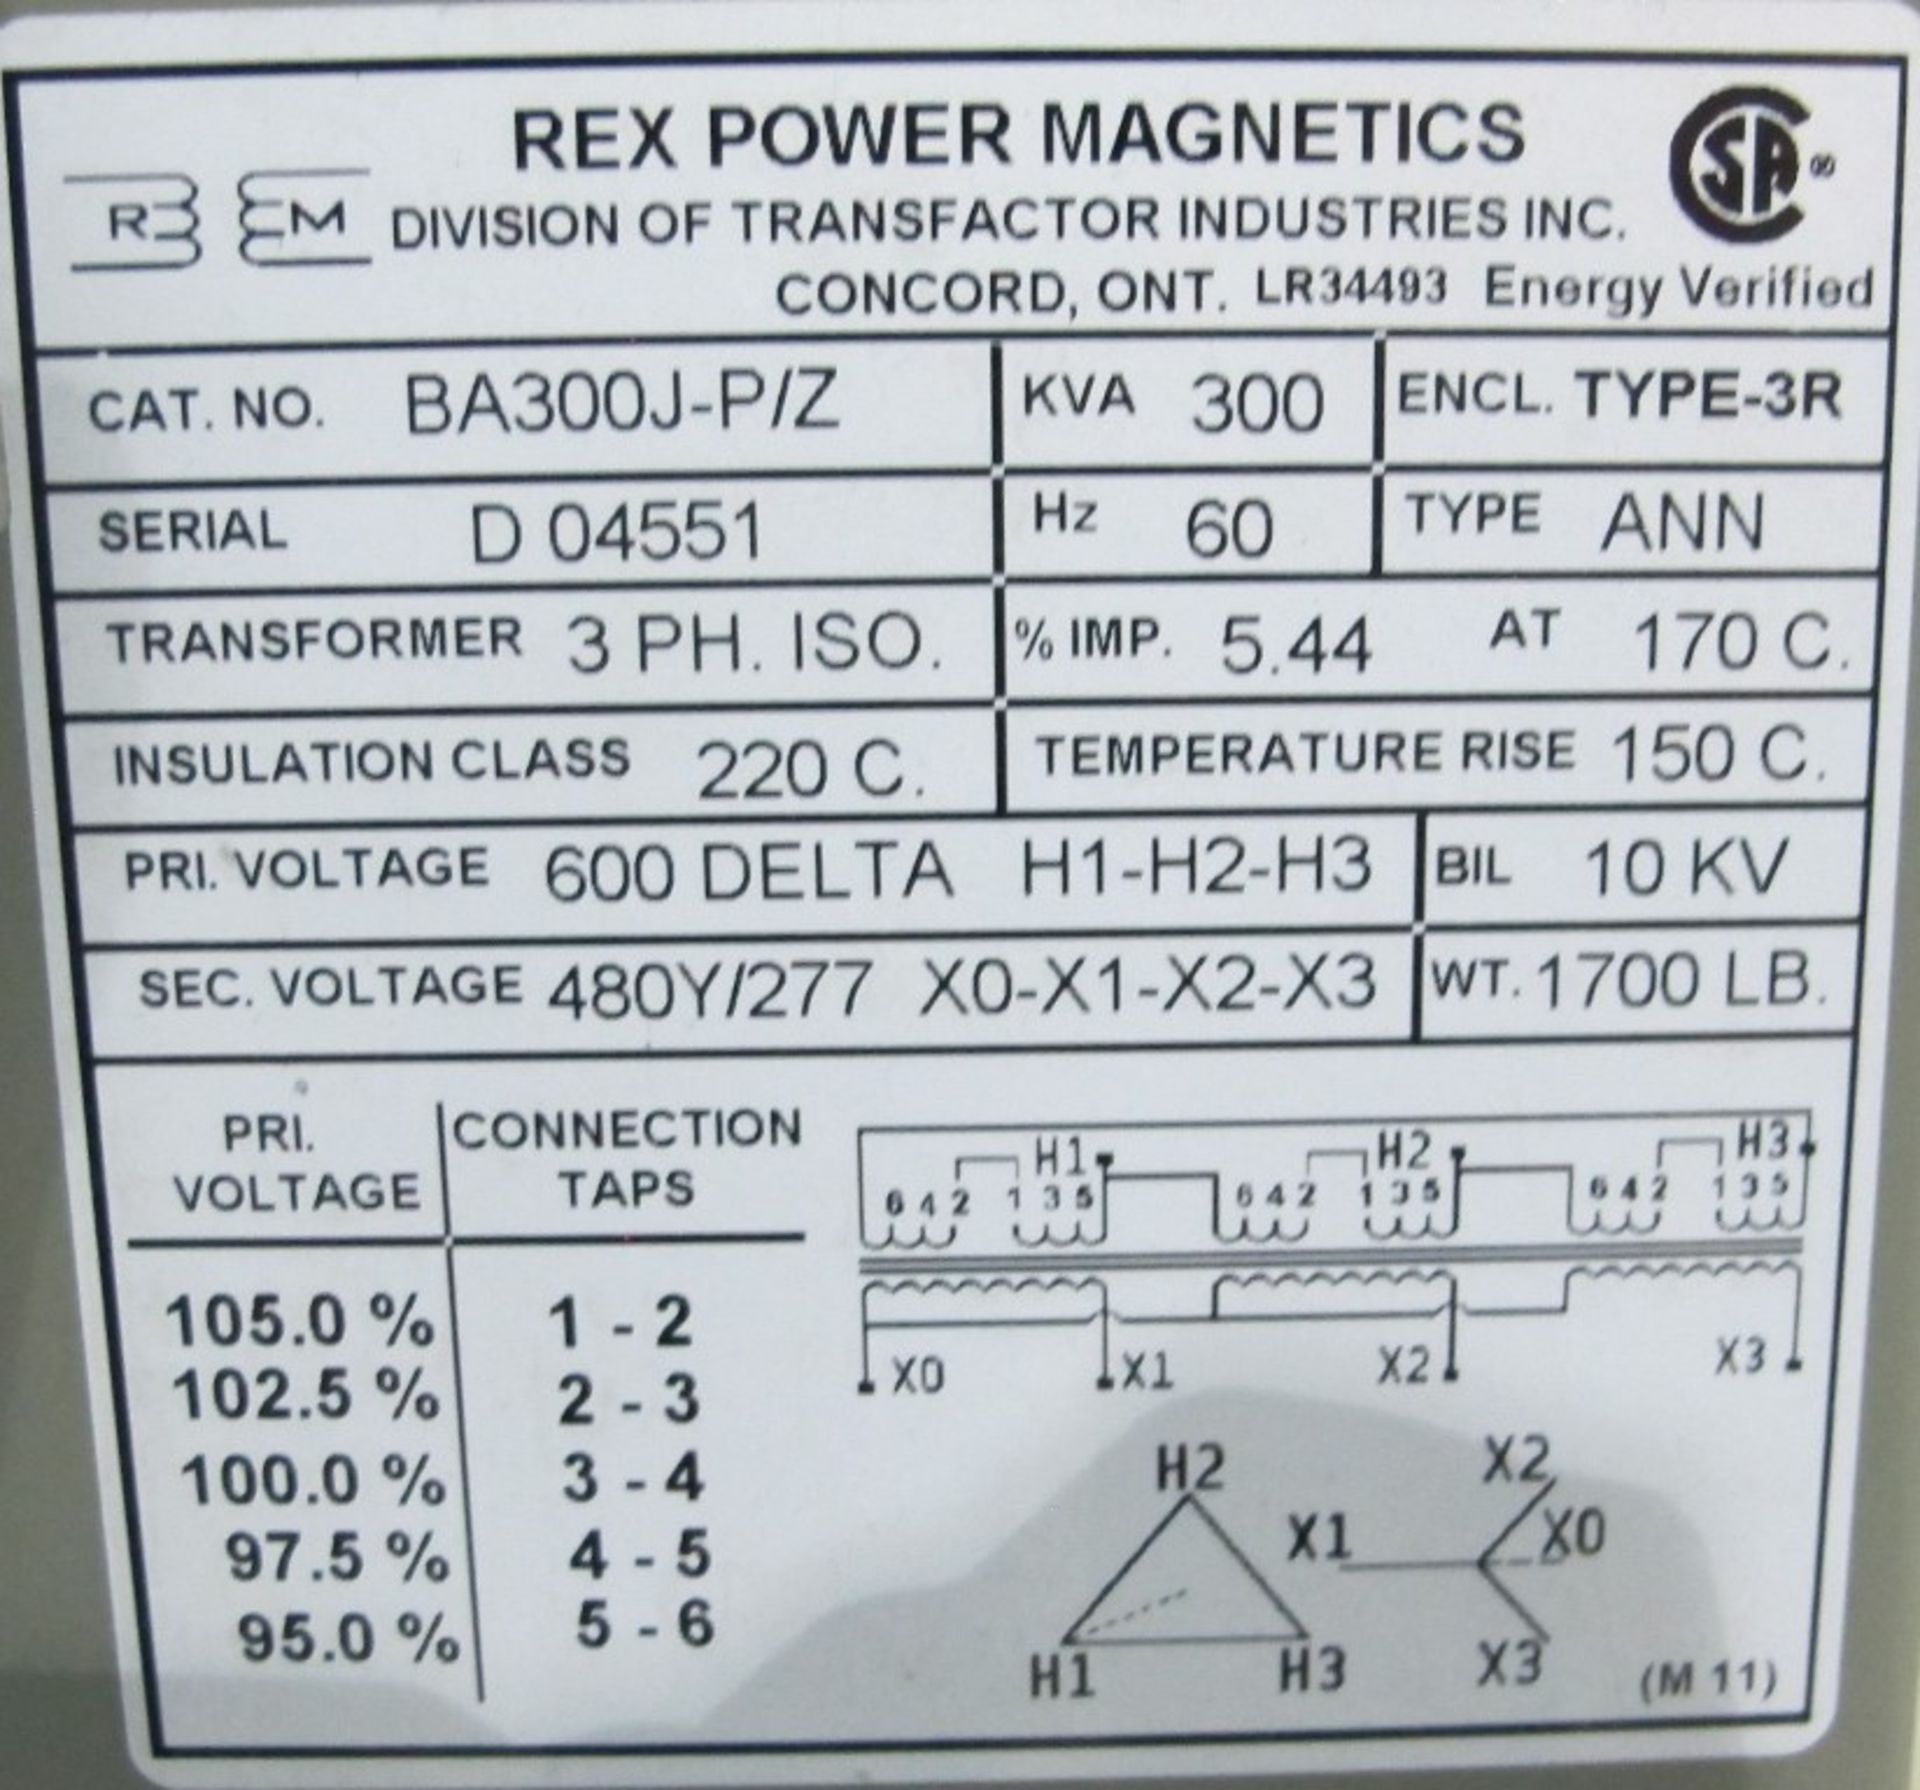 REX POWER MAGNETICS 300KVA TRANSFORMER, 600D PRIMARY, 480Y/277 SECONDARY - Image 2 of 2